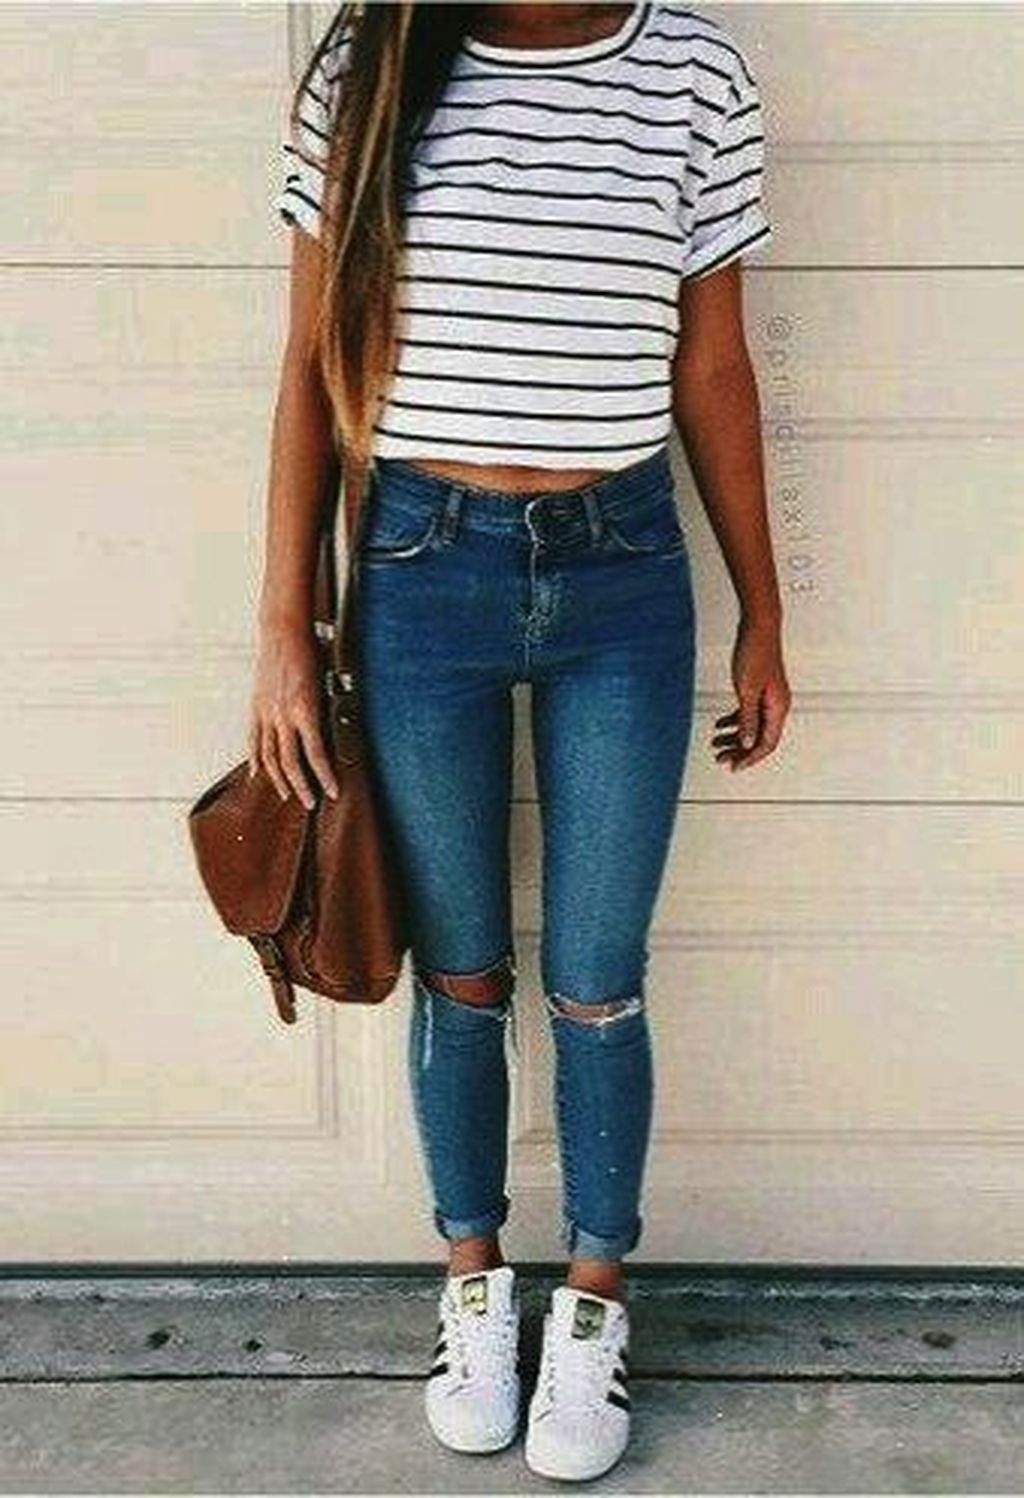 15 Best Simple Megging Outfits Images On Pinterest